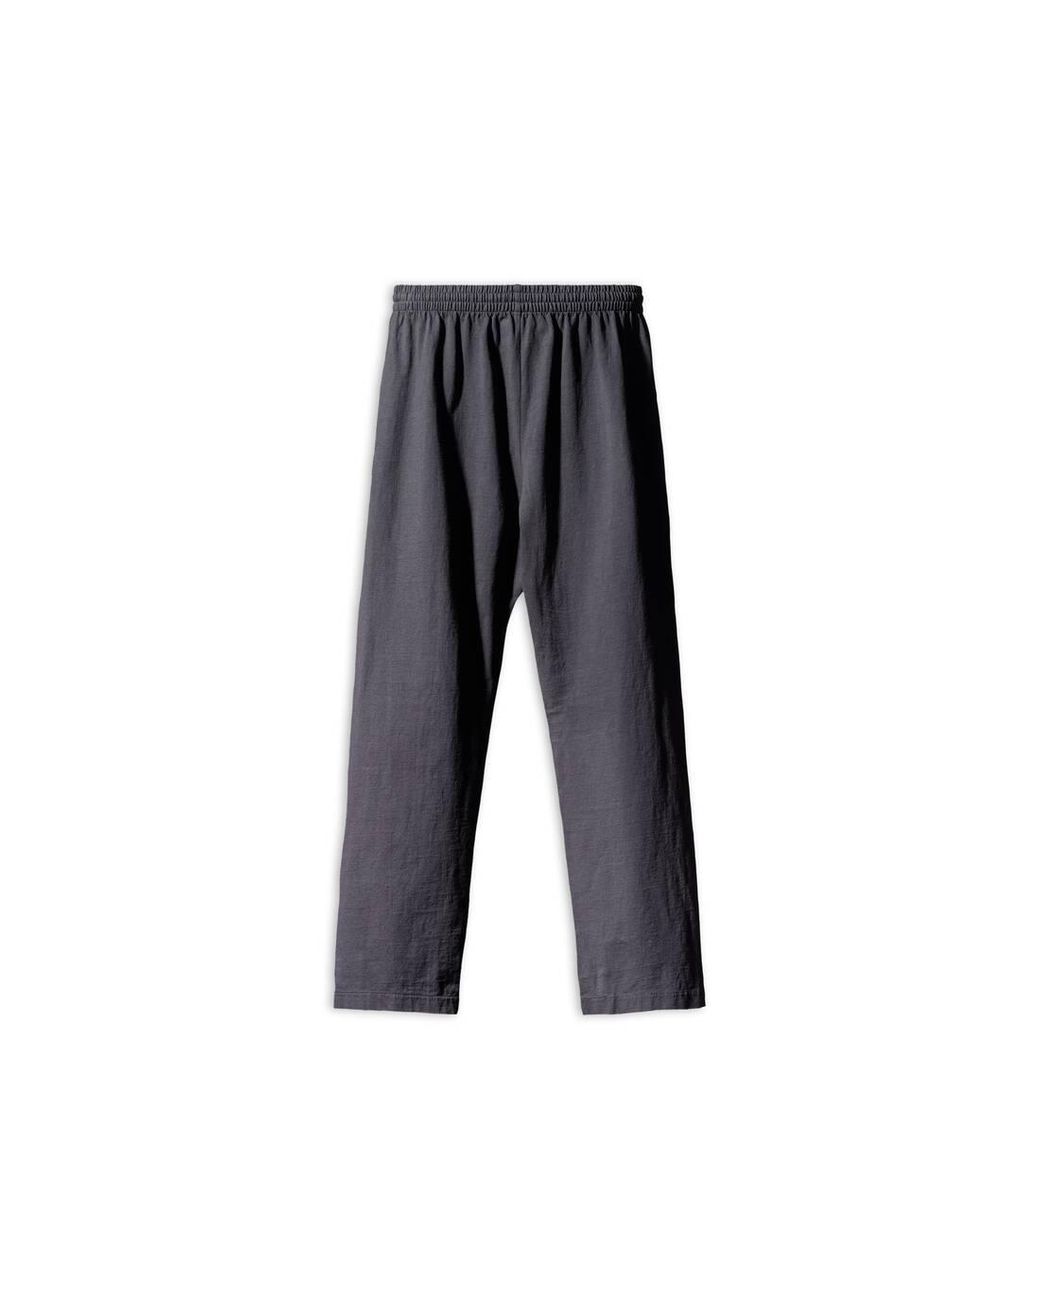 Balenciaga Yeezy Gap Engineered By Fitted Sweatpants in Black | Lyst